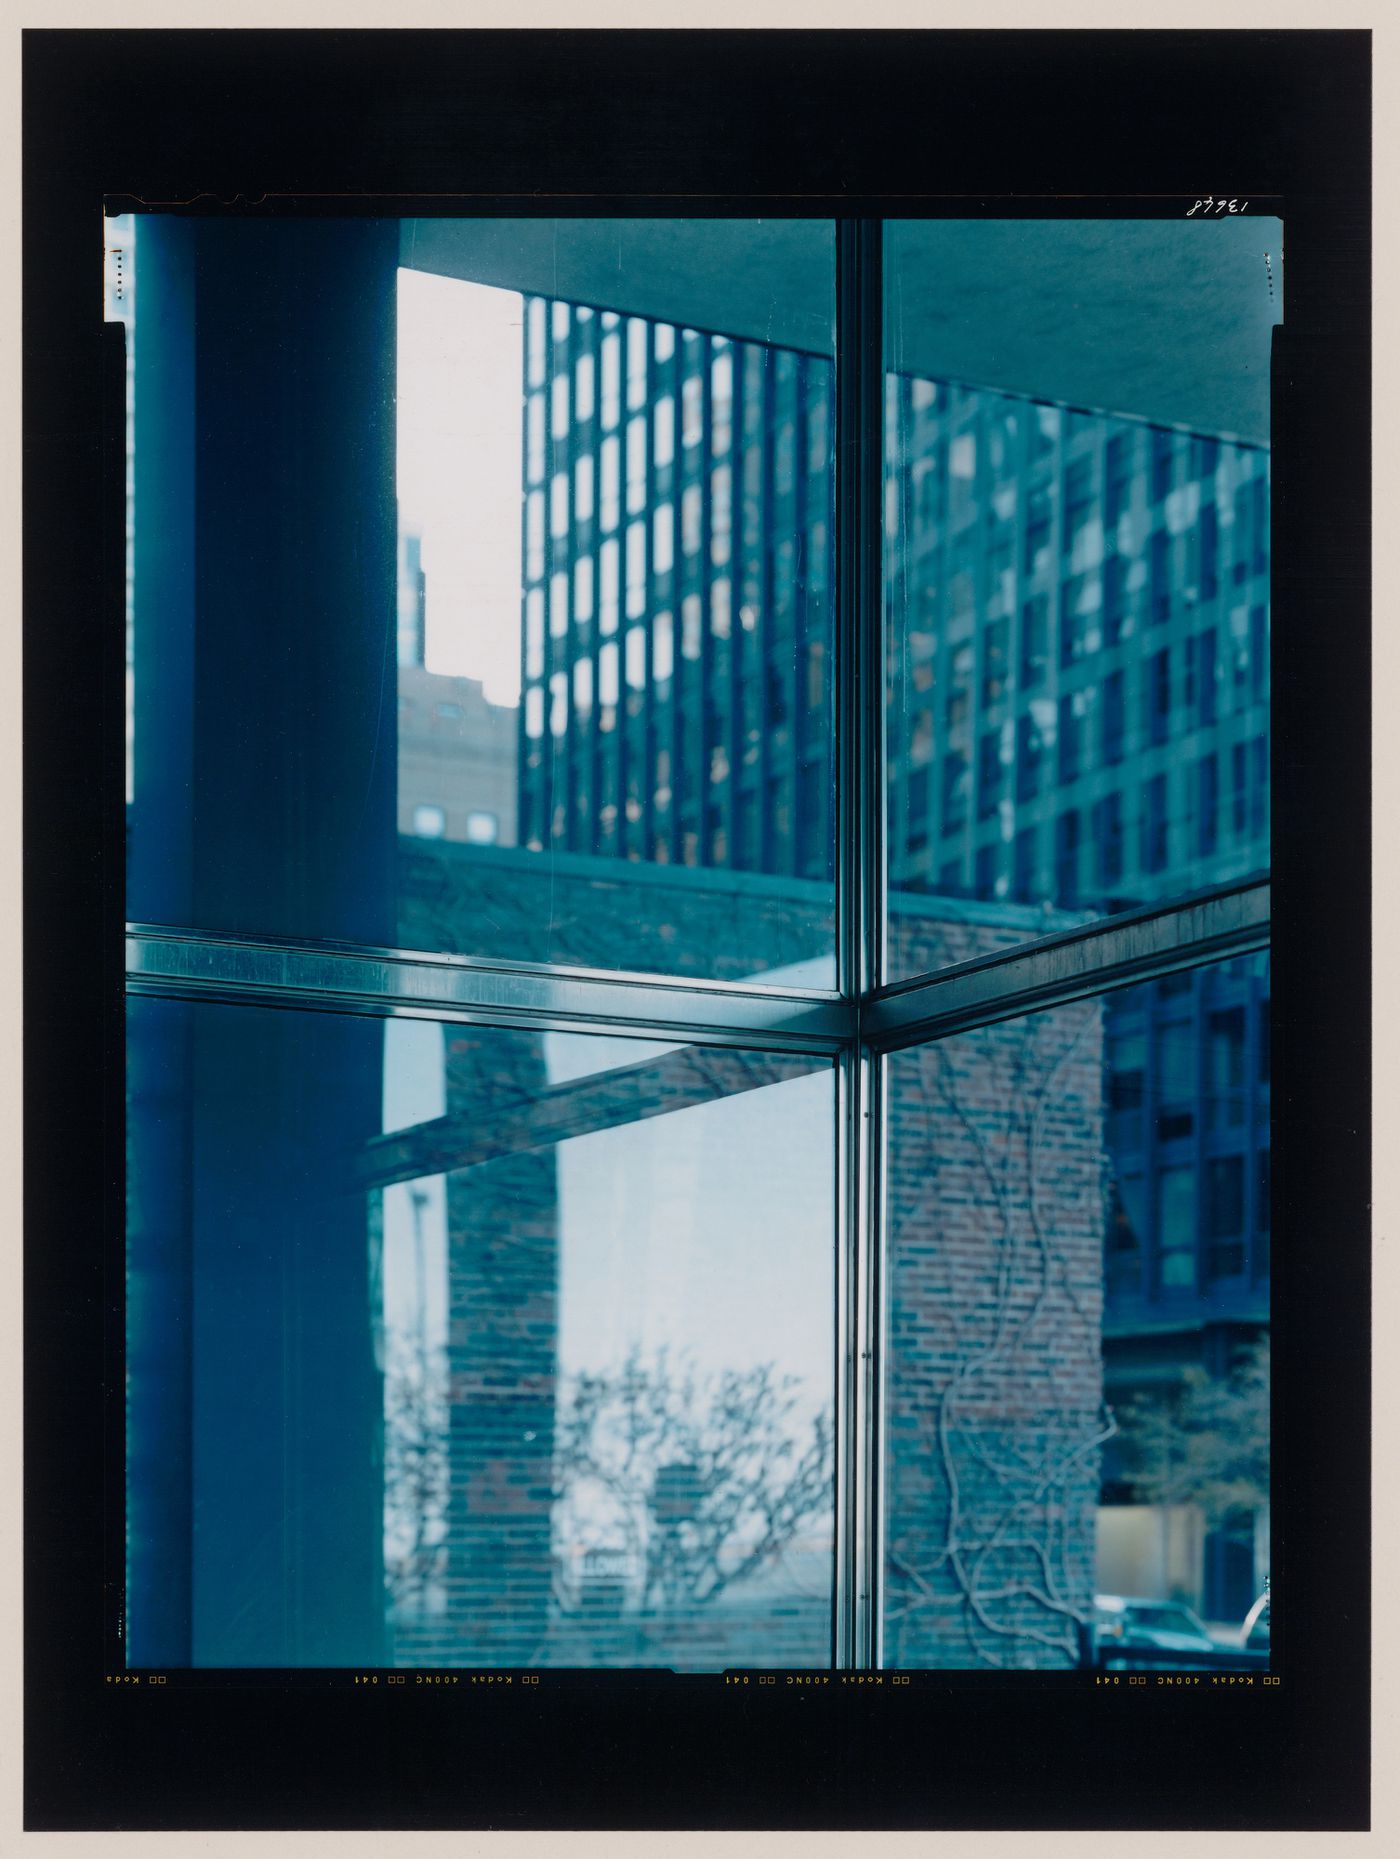 Interior view of 860 or 880 Lake Shore Drive Apartments looking through a window, Chicago, Illinois